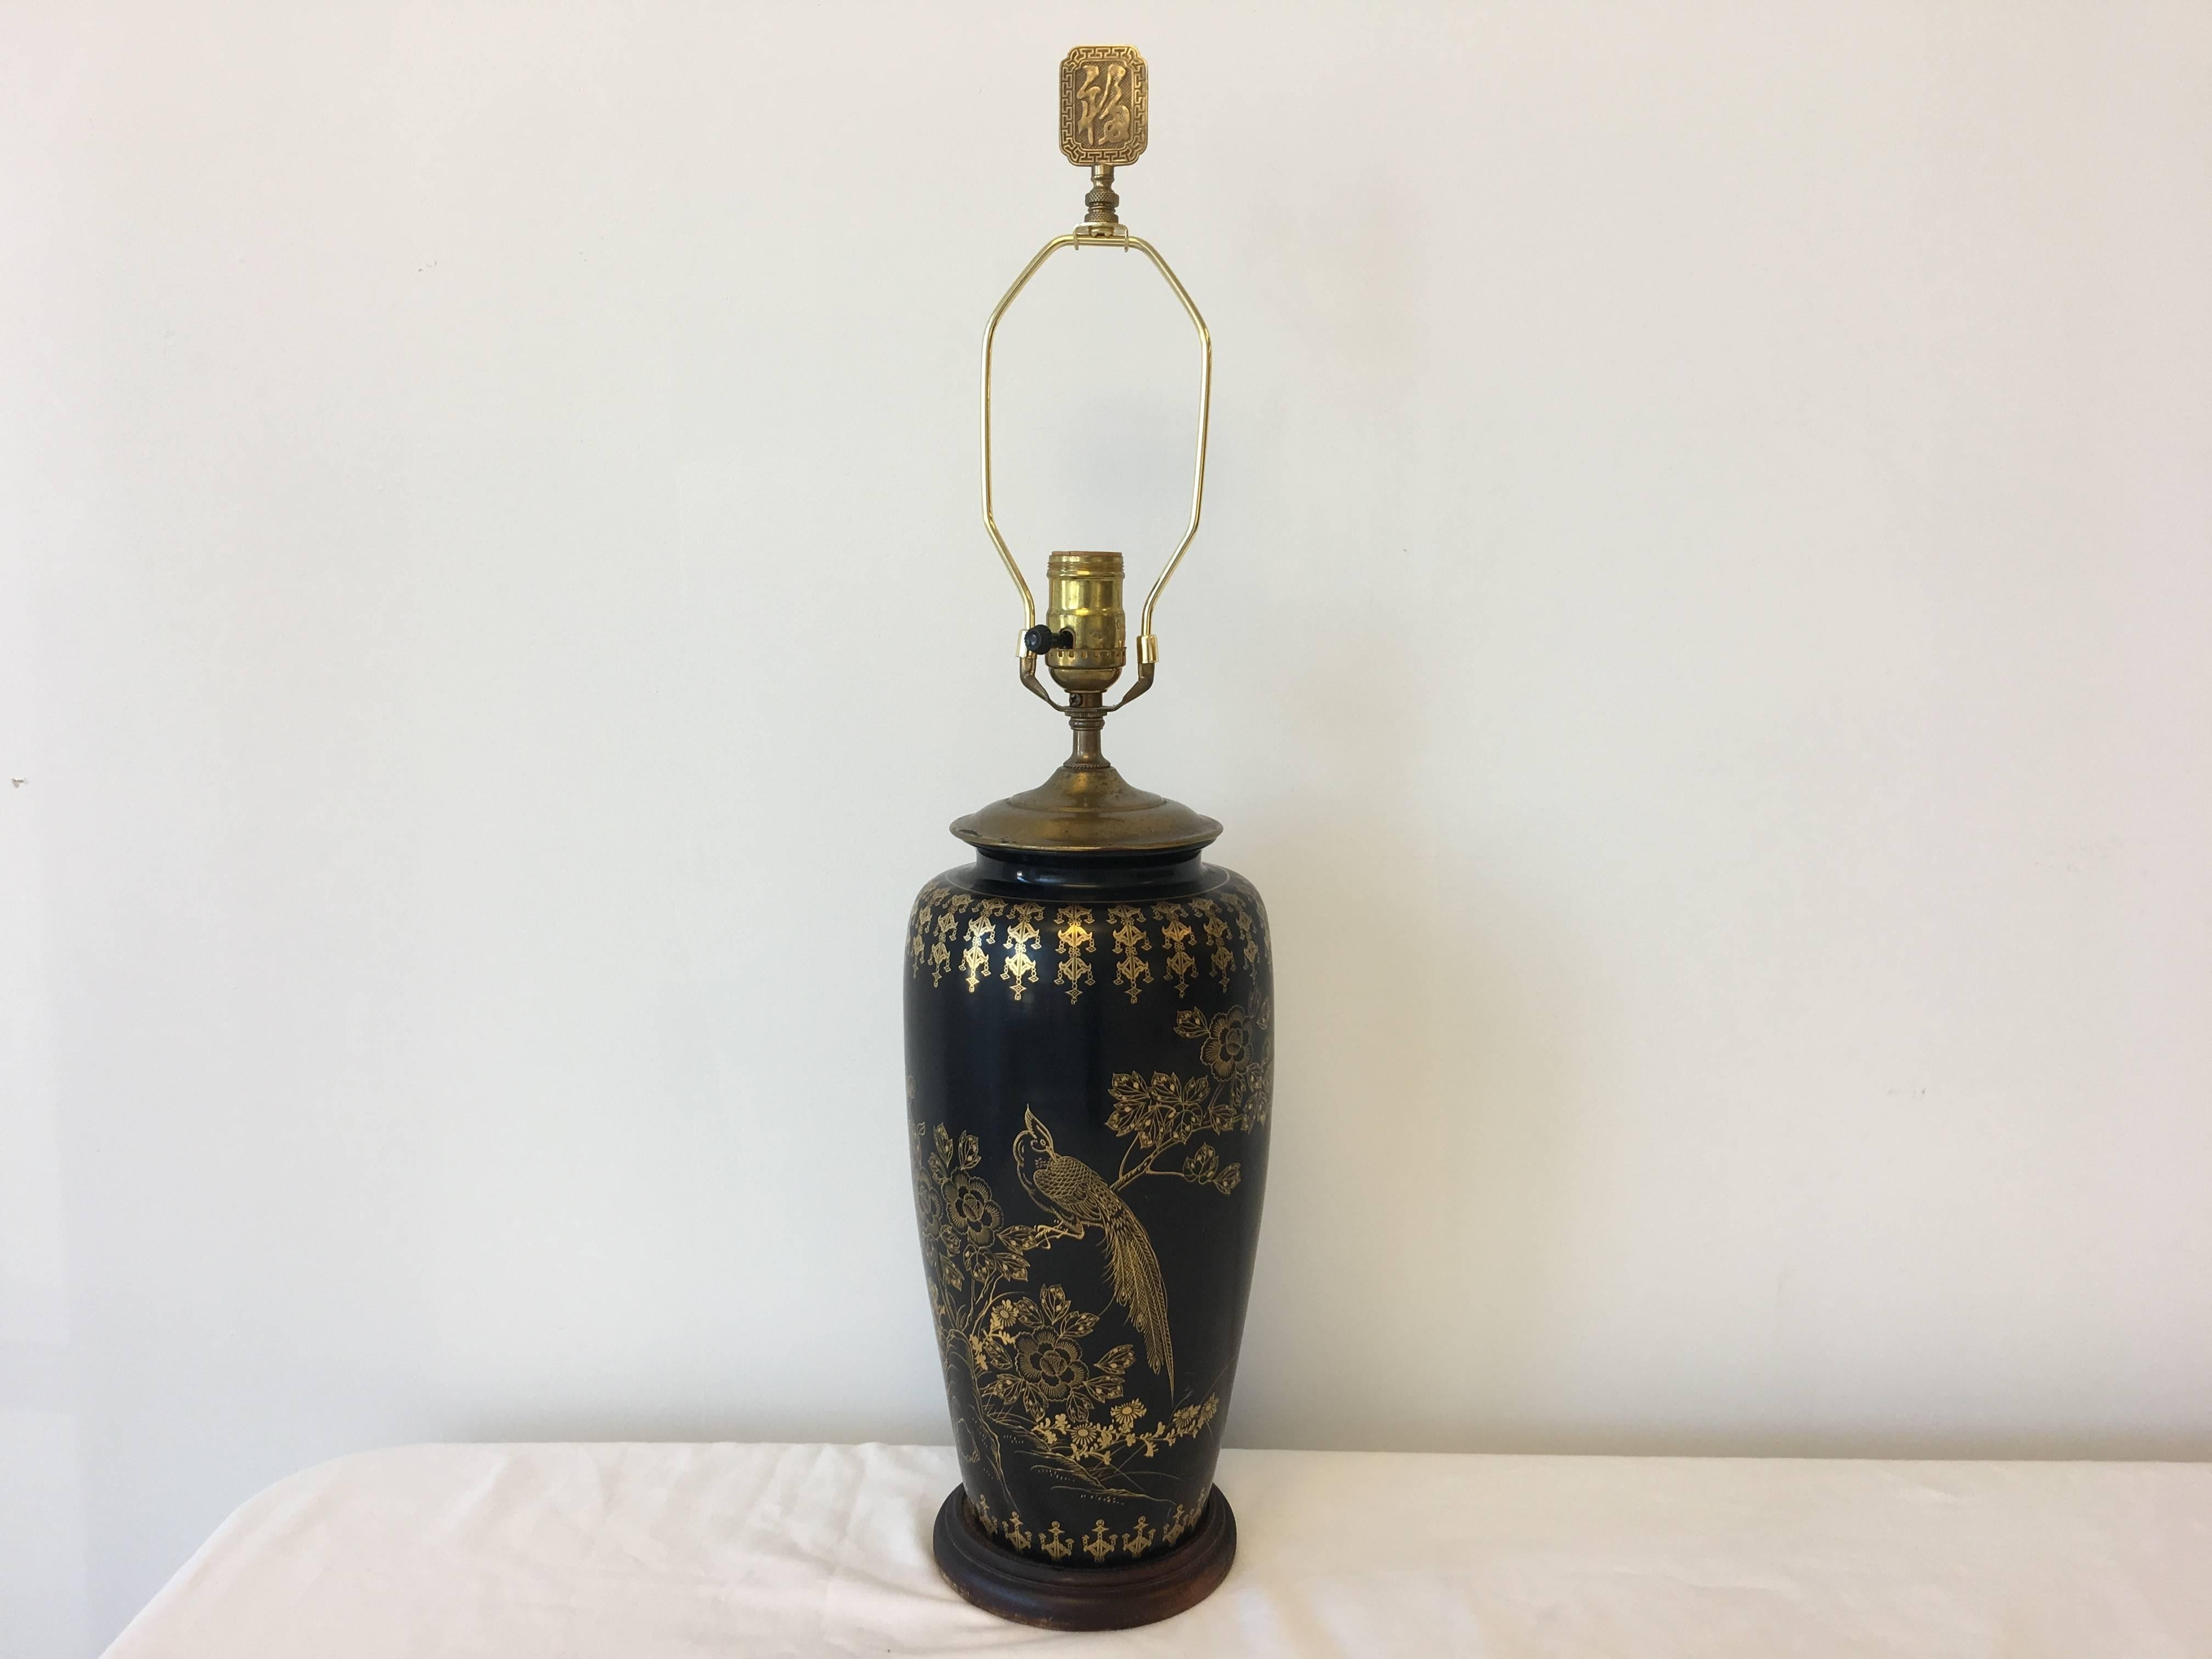 Chinoiserie 1950s Black and Gold Tole Table Lamp with Hand-Painted Peacock and Floral Motif For Sale